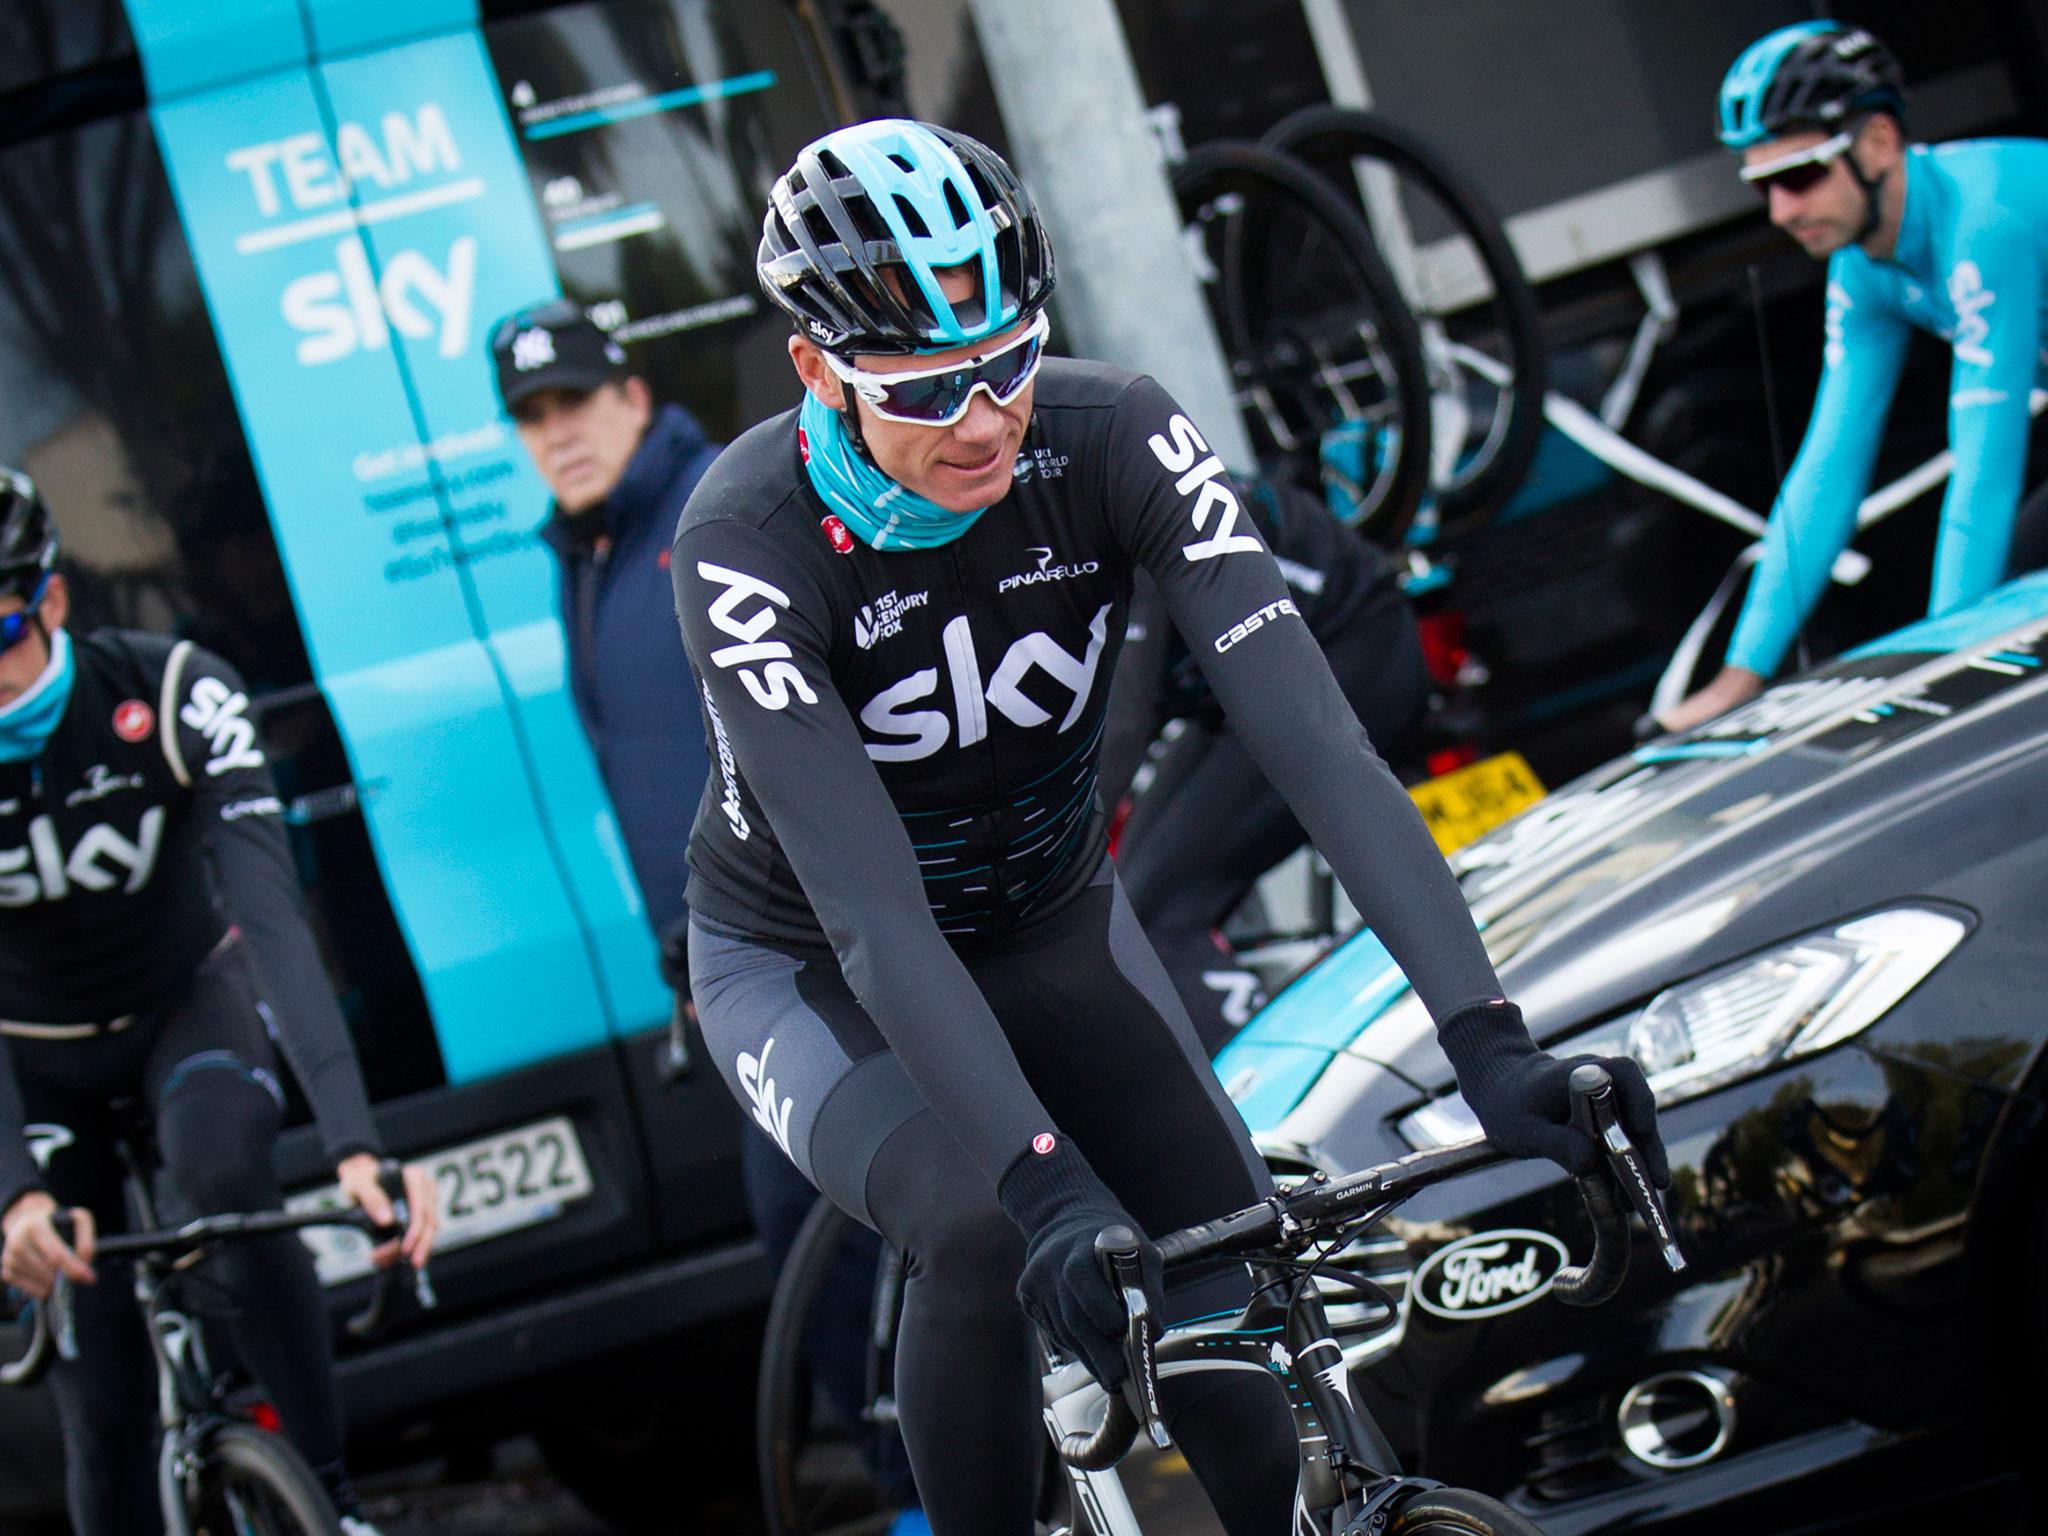 Chris Froome has been asked to explain an adverse analytical finding